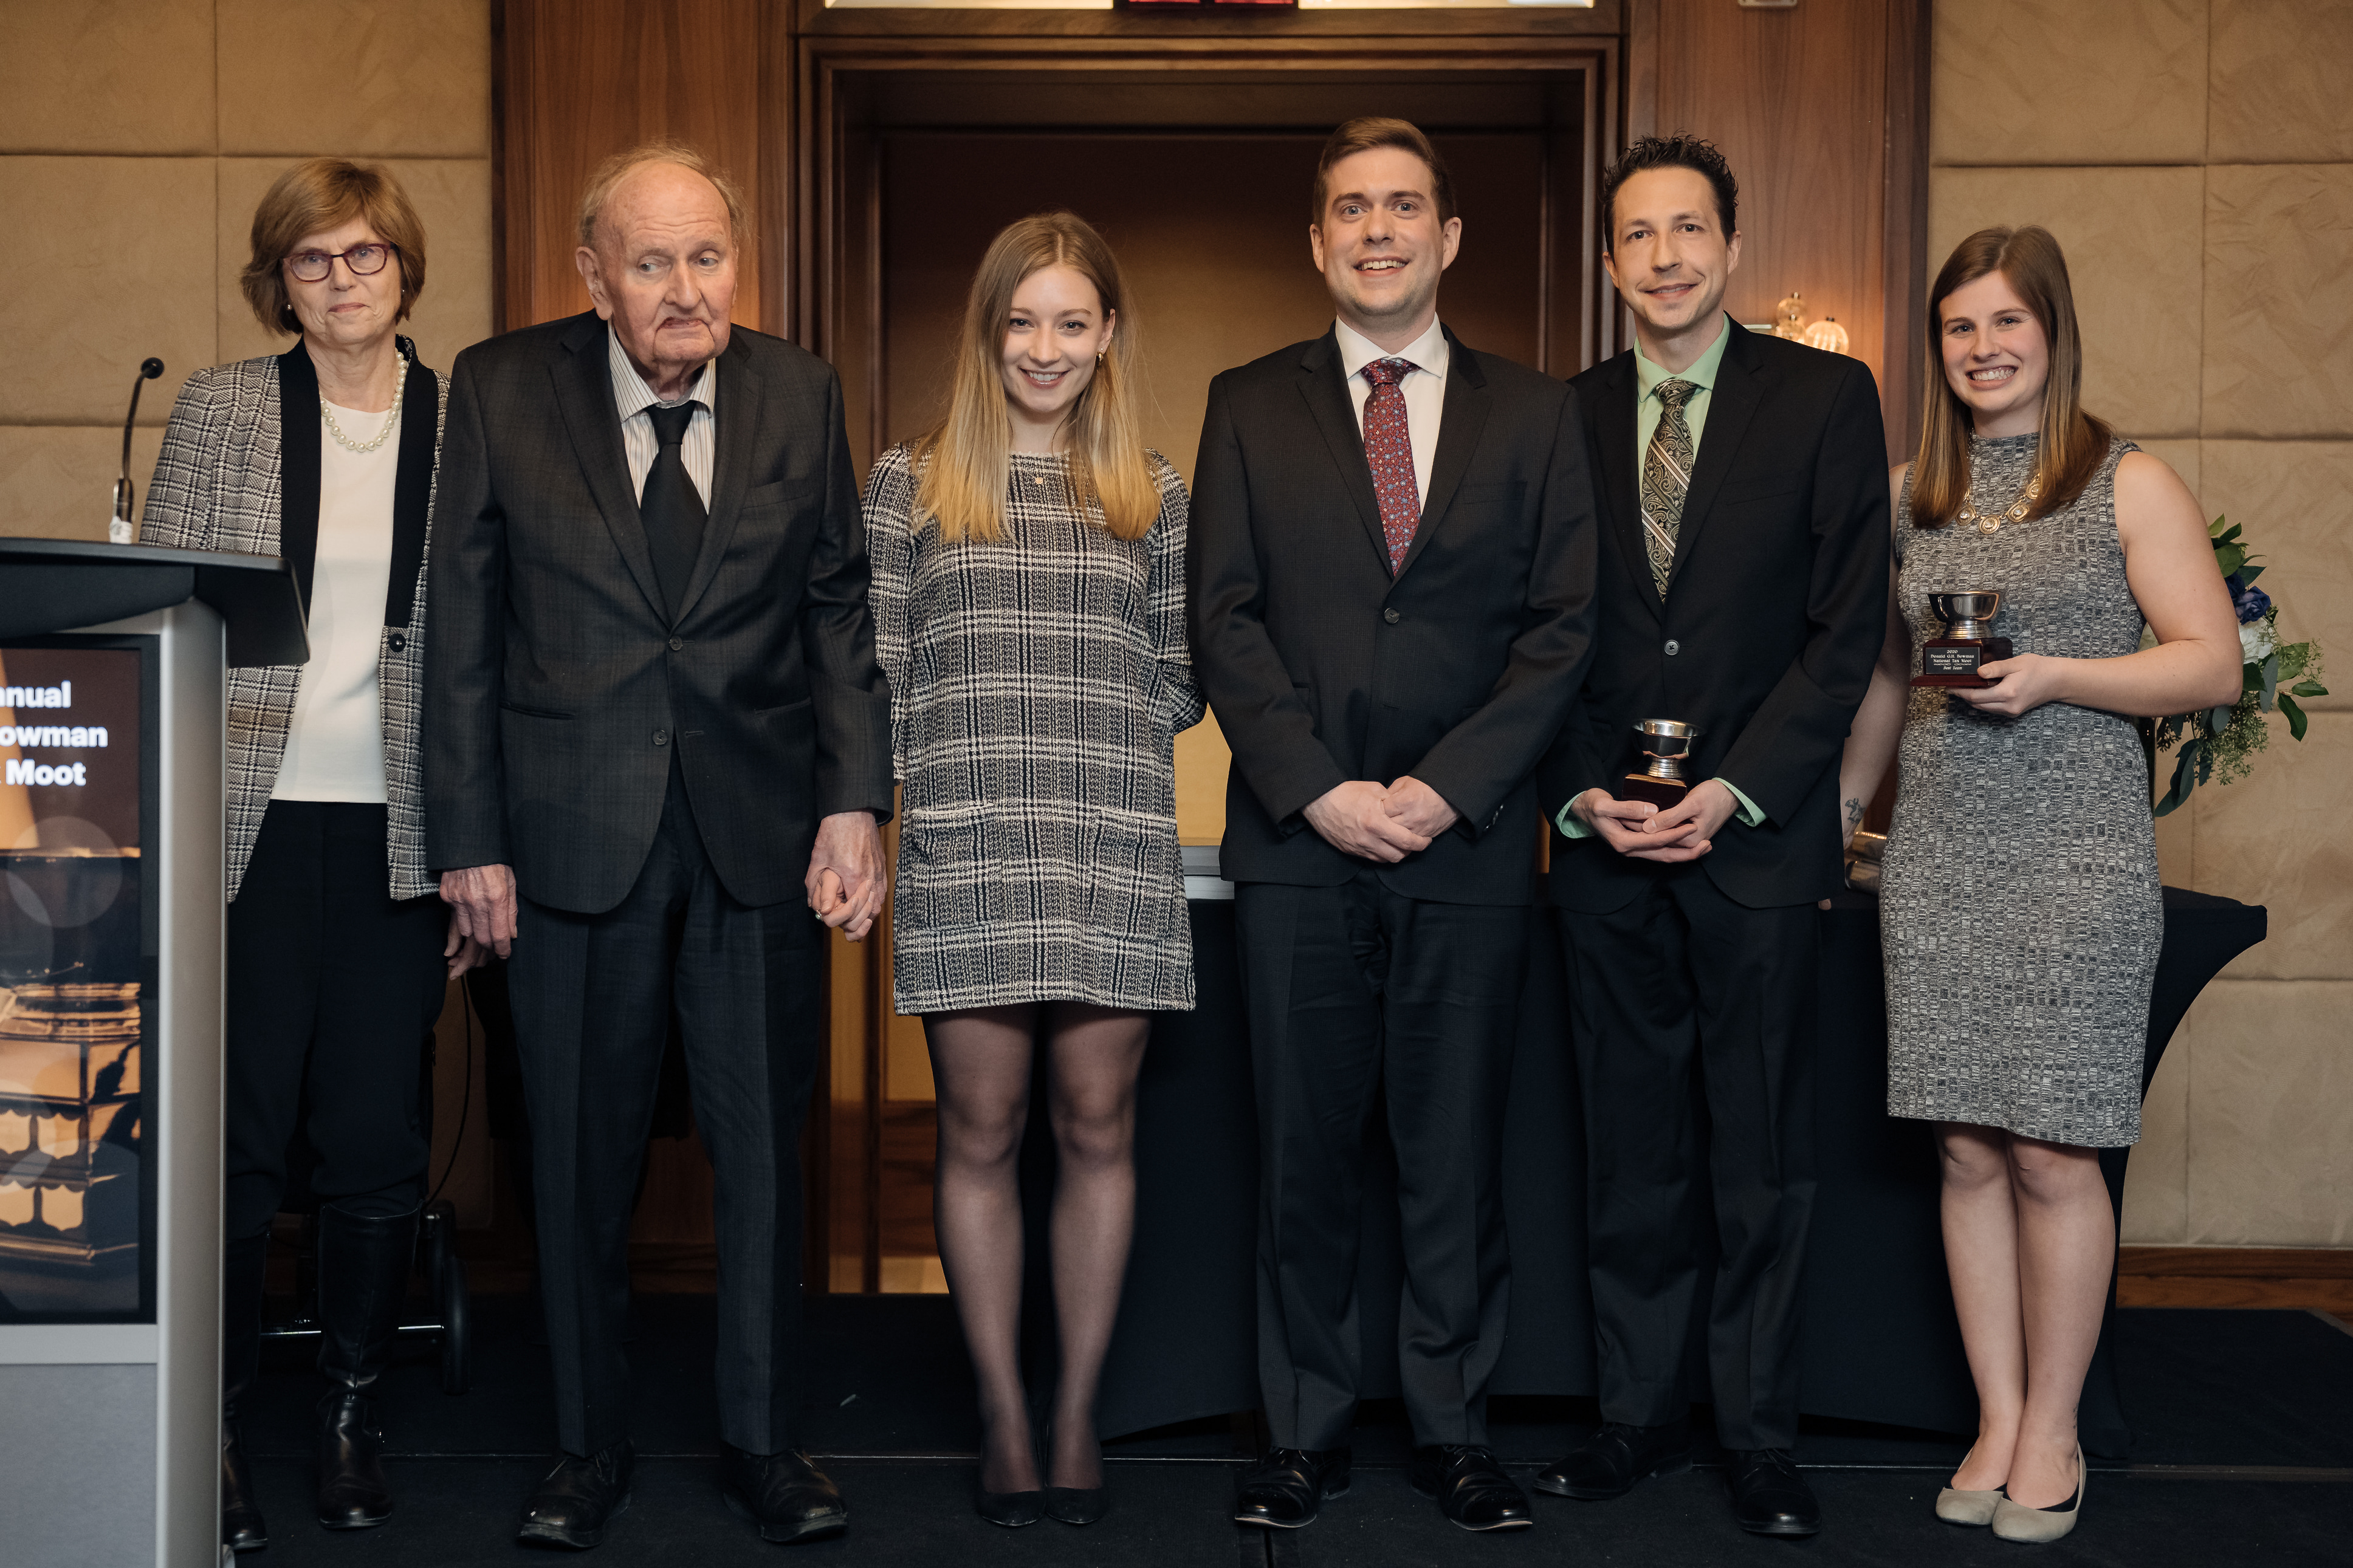 Pictured (L to R): The Honourable Judith M. Woods, Justice of the Federal Court of Appeal, Donald G.H. Bowman, Anna Lekach, Will Hampton, Graham Fuga and Madison Miller. ©Dentons Canada LLP 